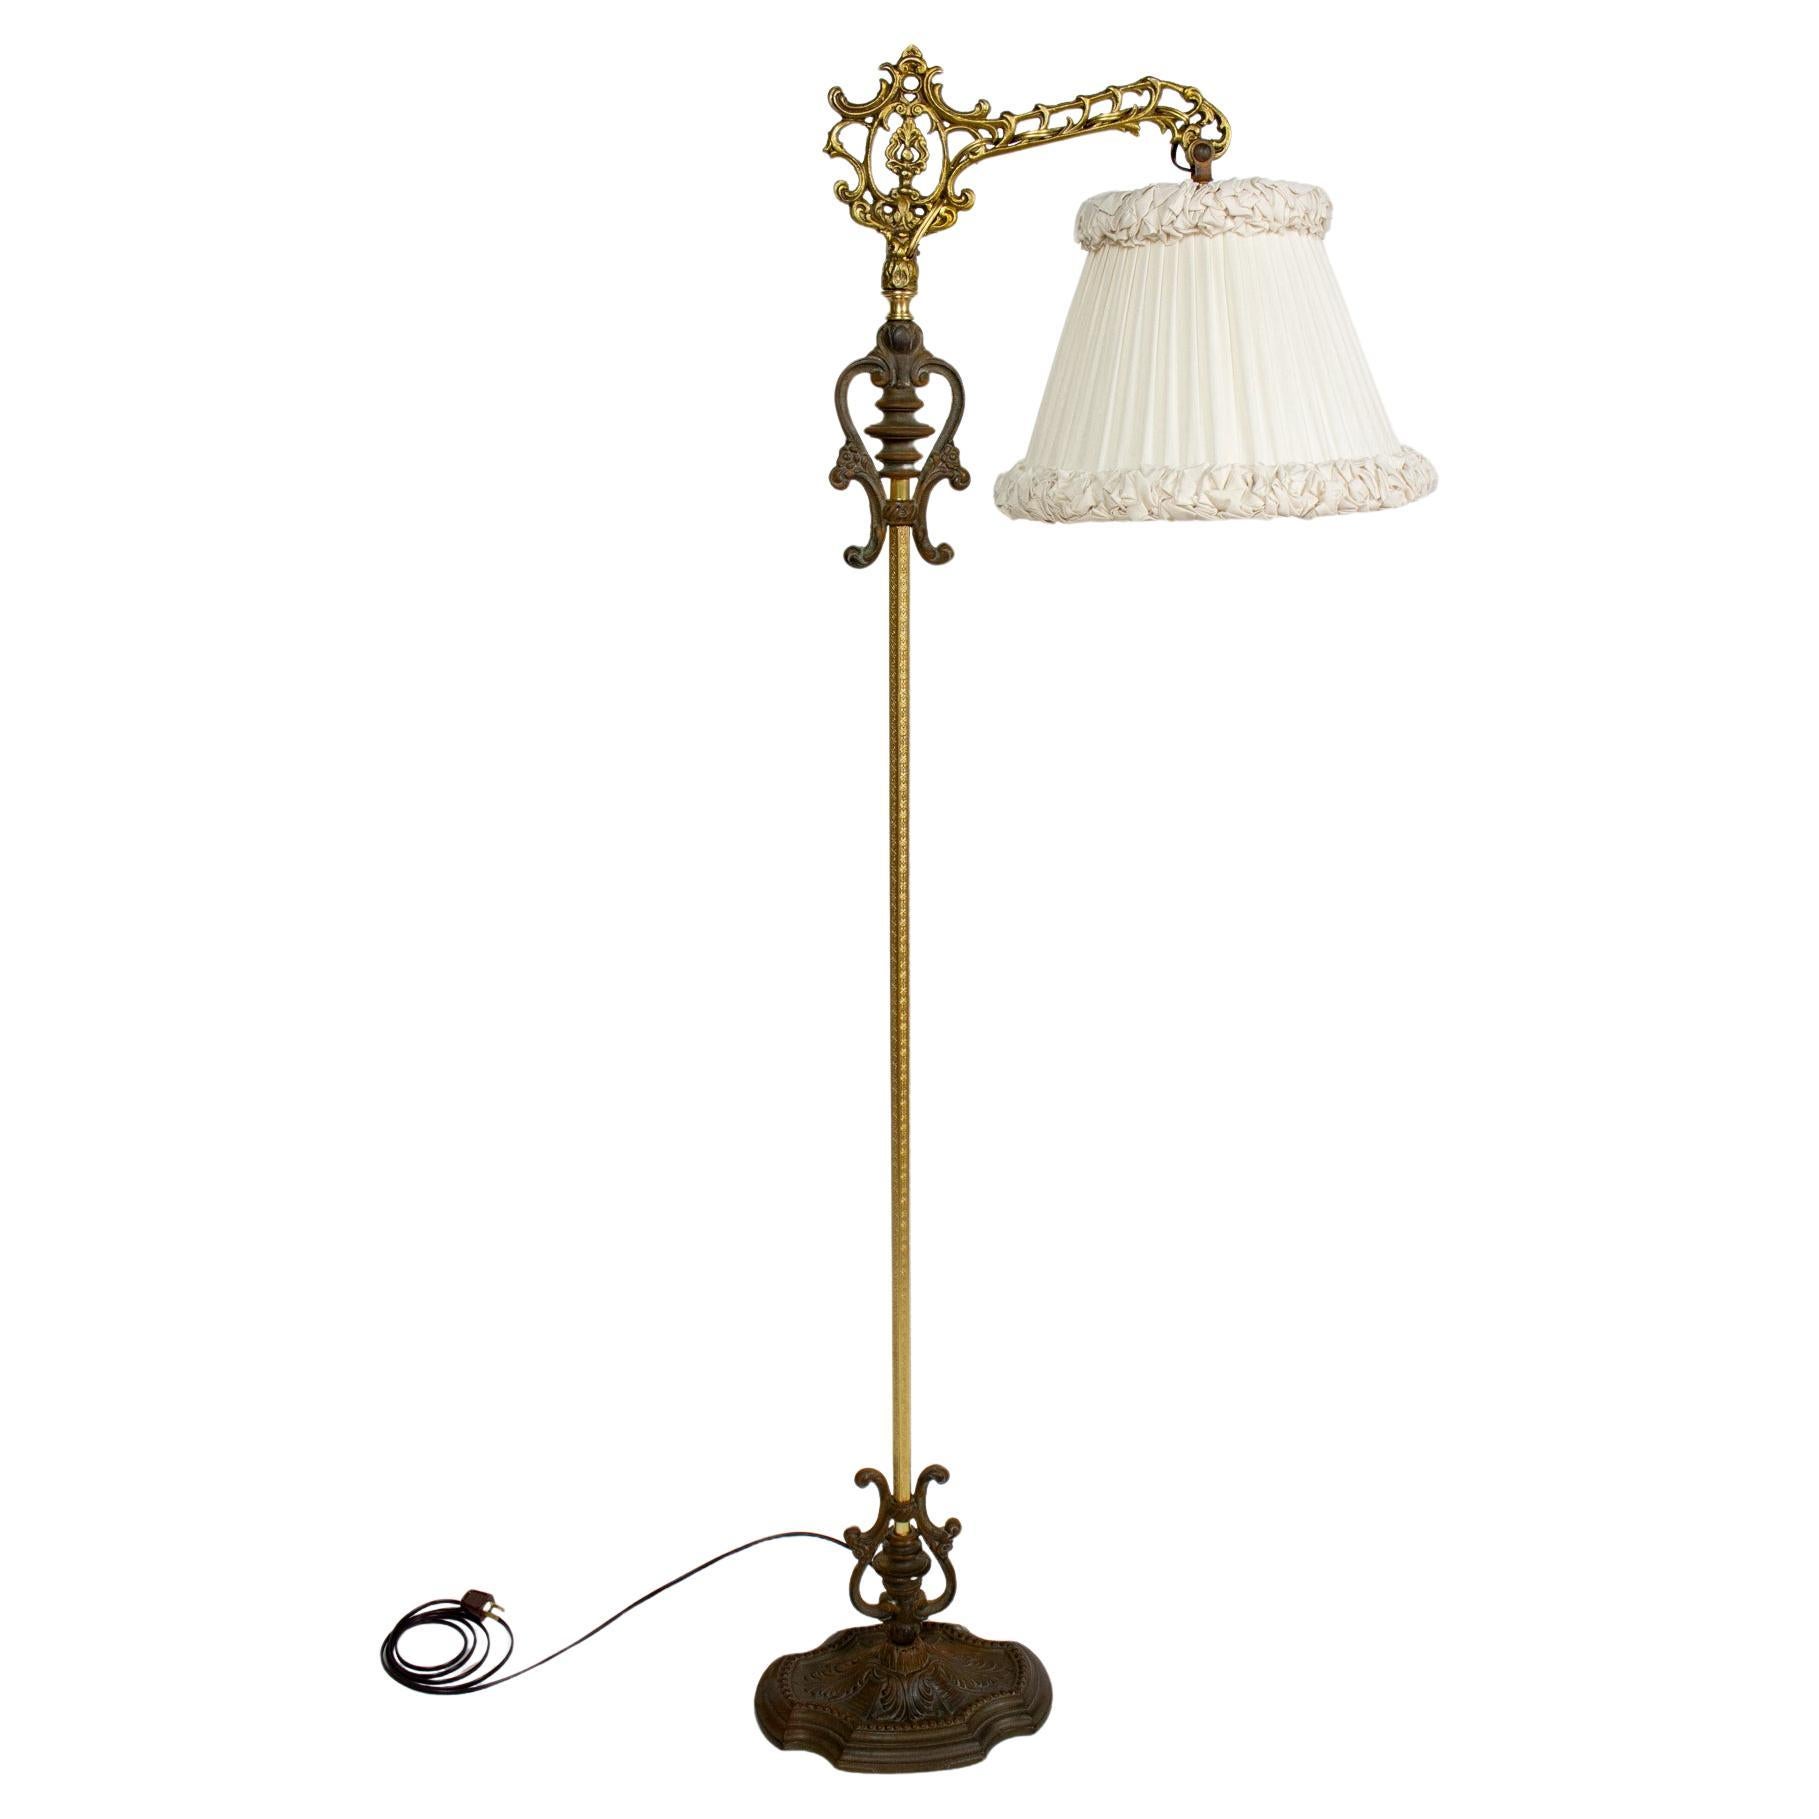 Ornate Rococo Revival Bridge Lamp with Pleated and Ruched off White Silk Shade For Sale